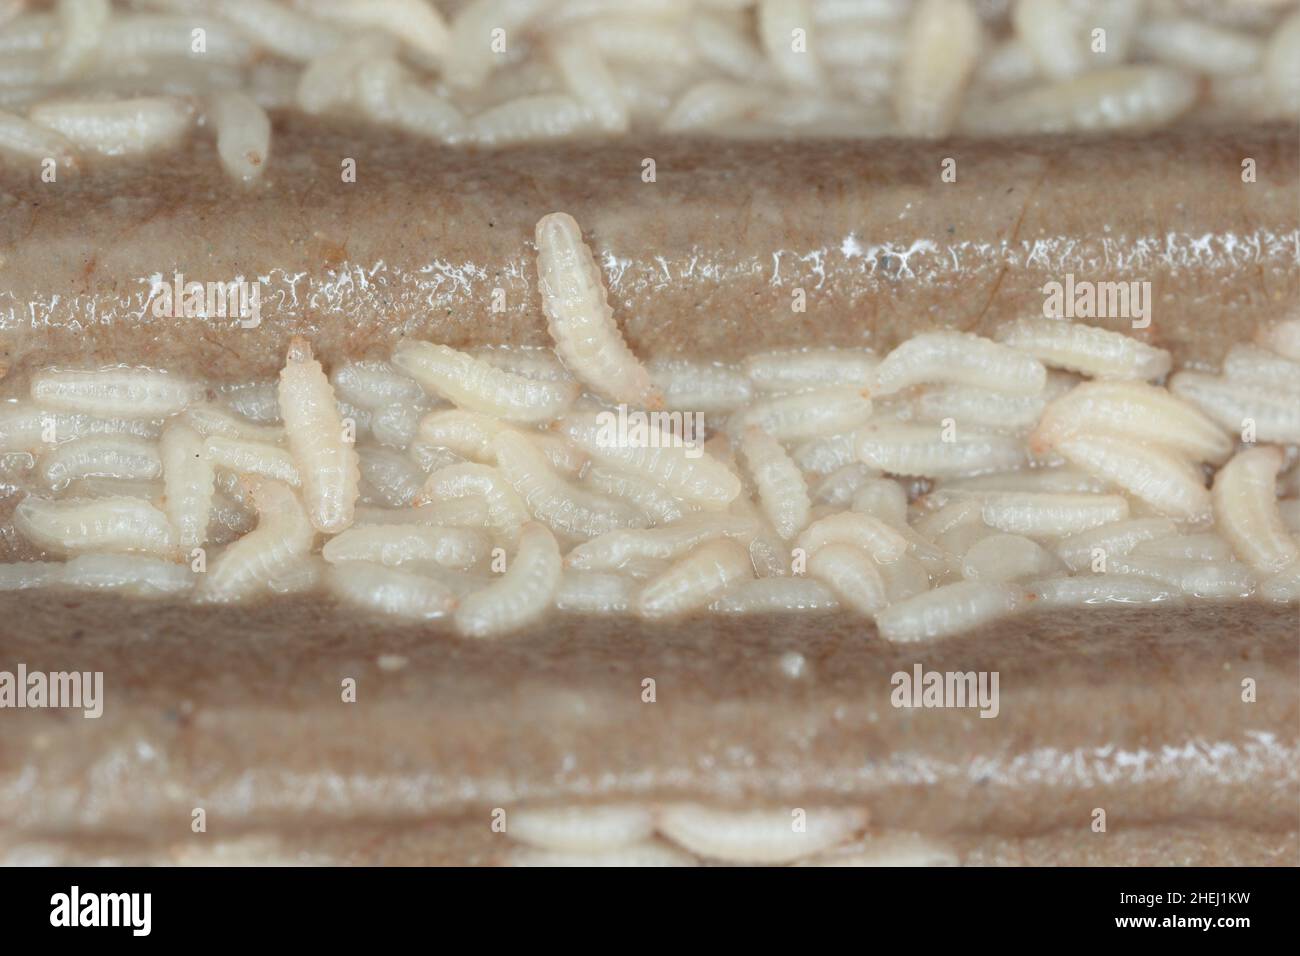 Hermetia illucens - Black soldier fly larvae in feeding plate with organic waste, Insect farm. Stock Photo